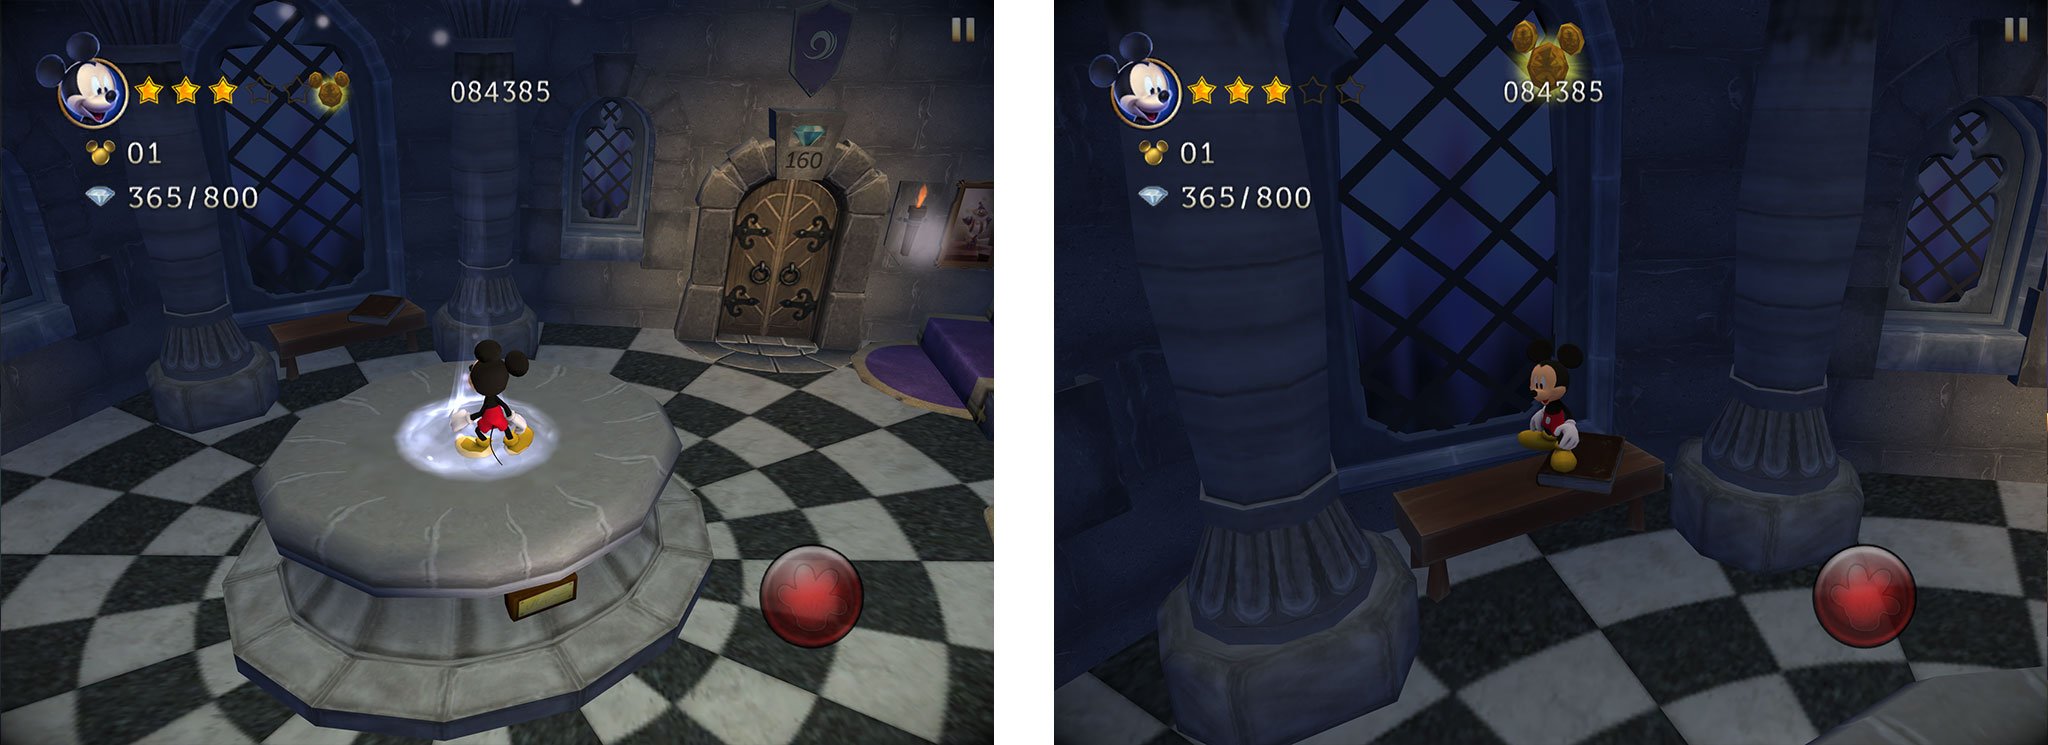 Castle of Illusion tips, tricks, and cheats: Collect the free life upstairs in the Castle of Illusion